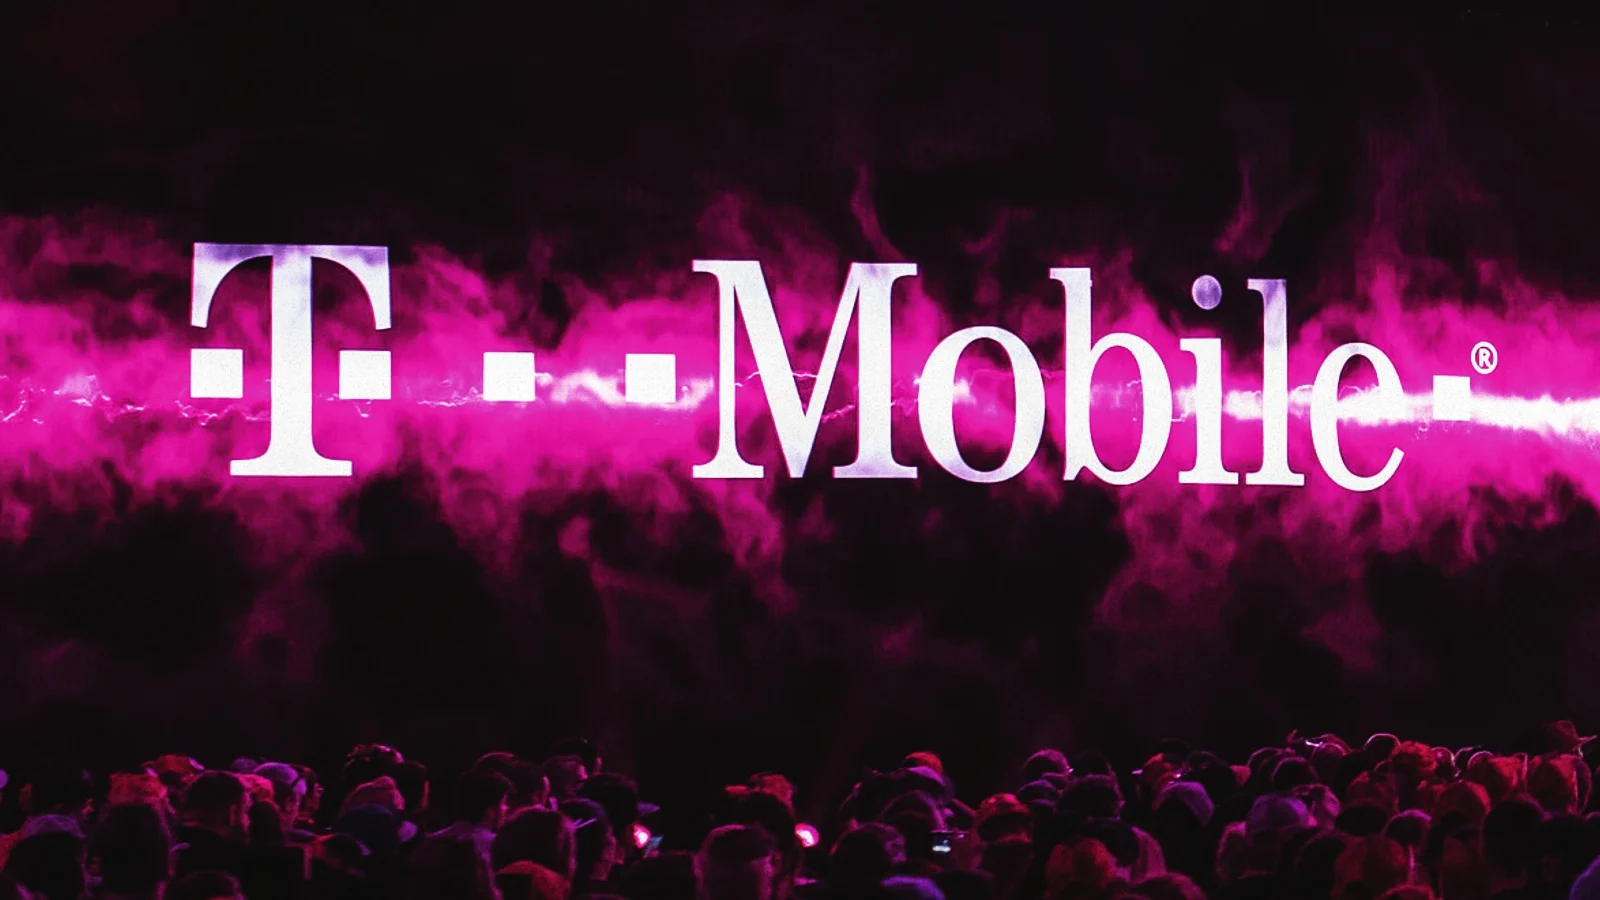 The Pricey Aftermath of T-Mobile's Mega Merger